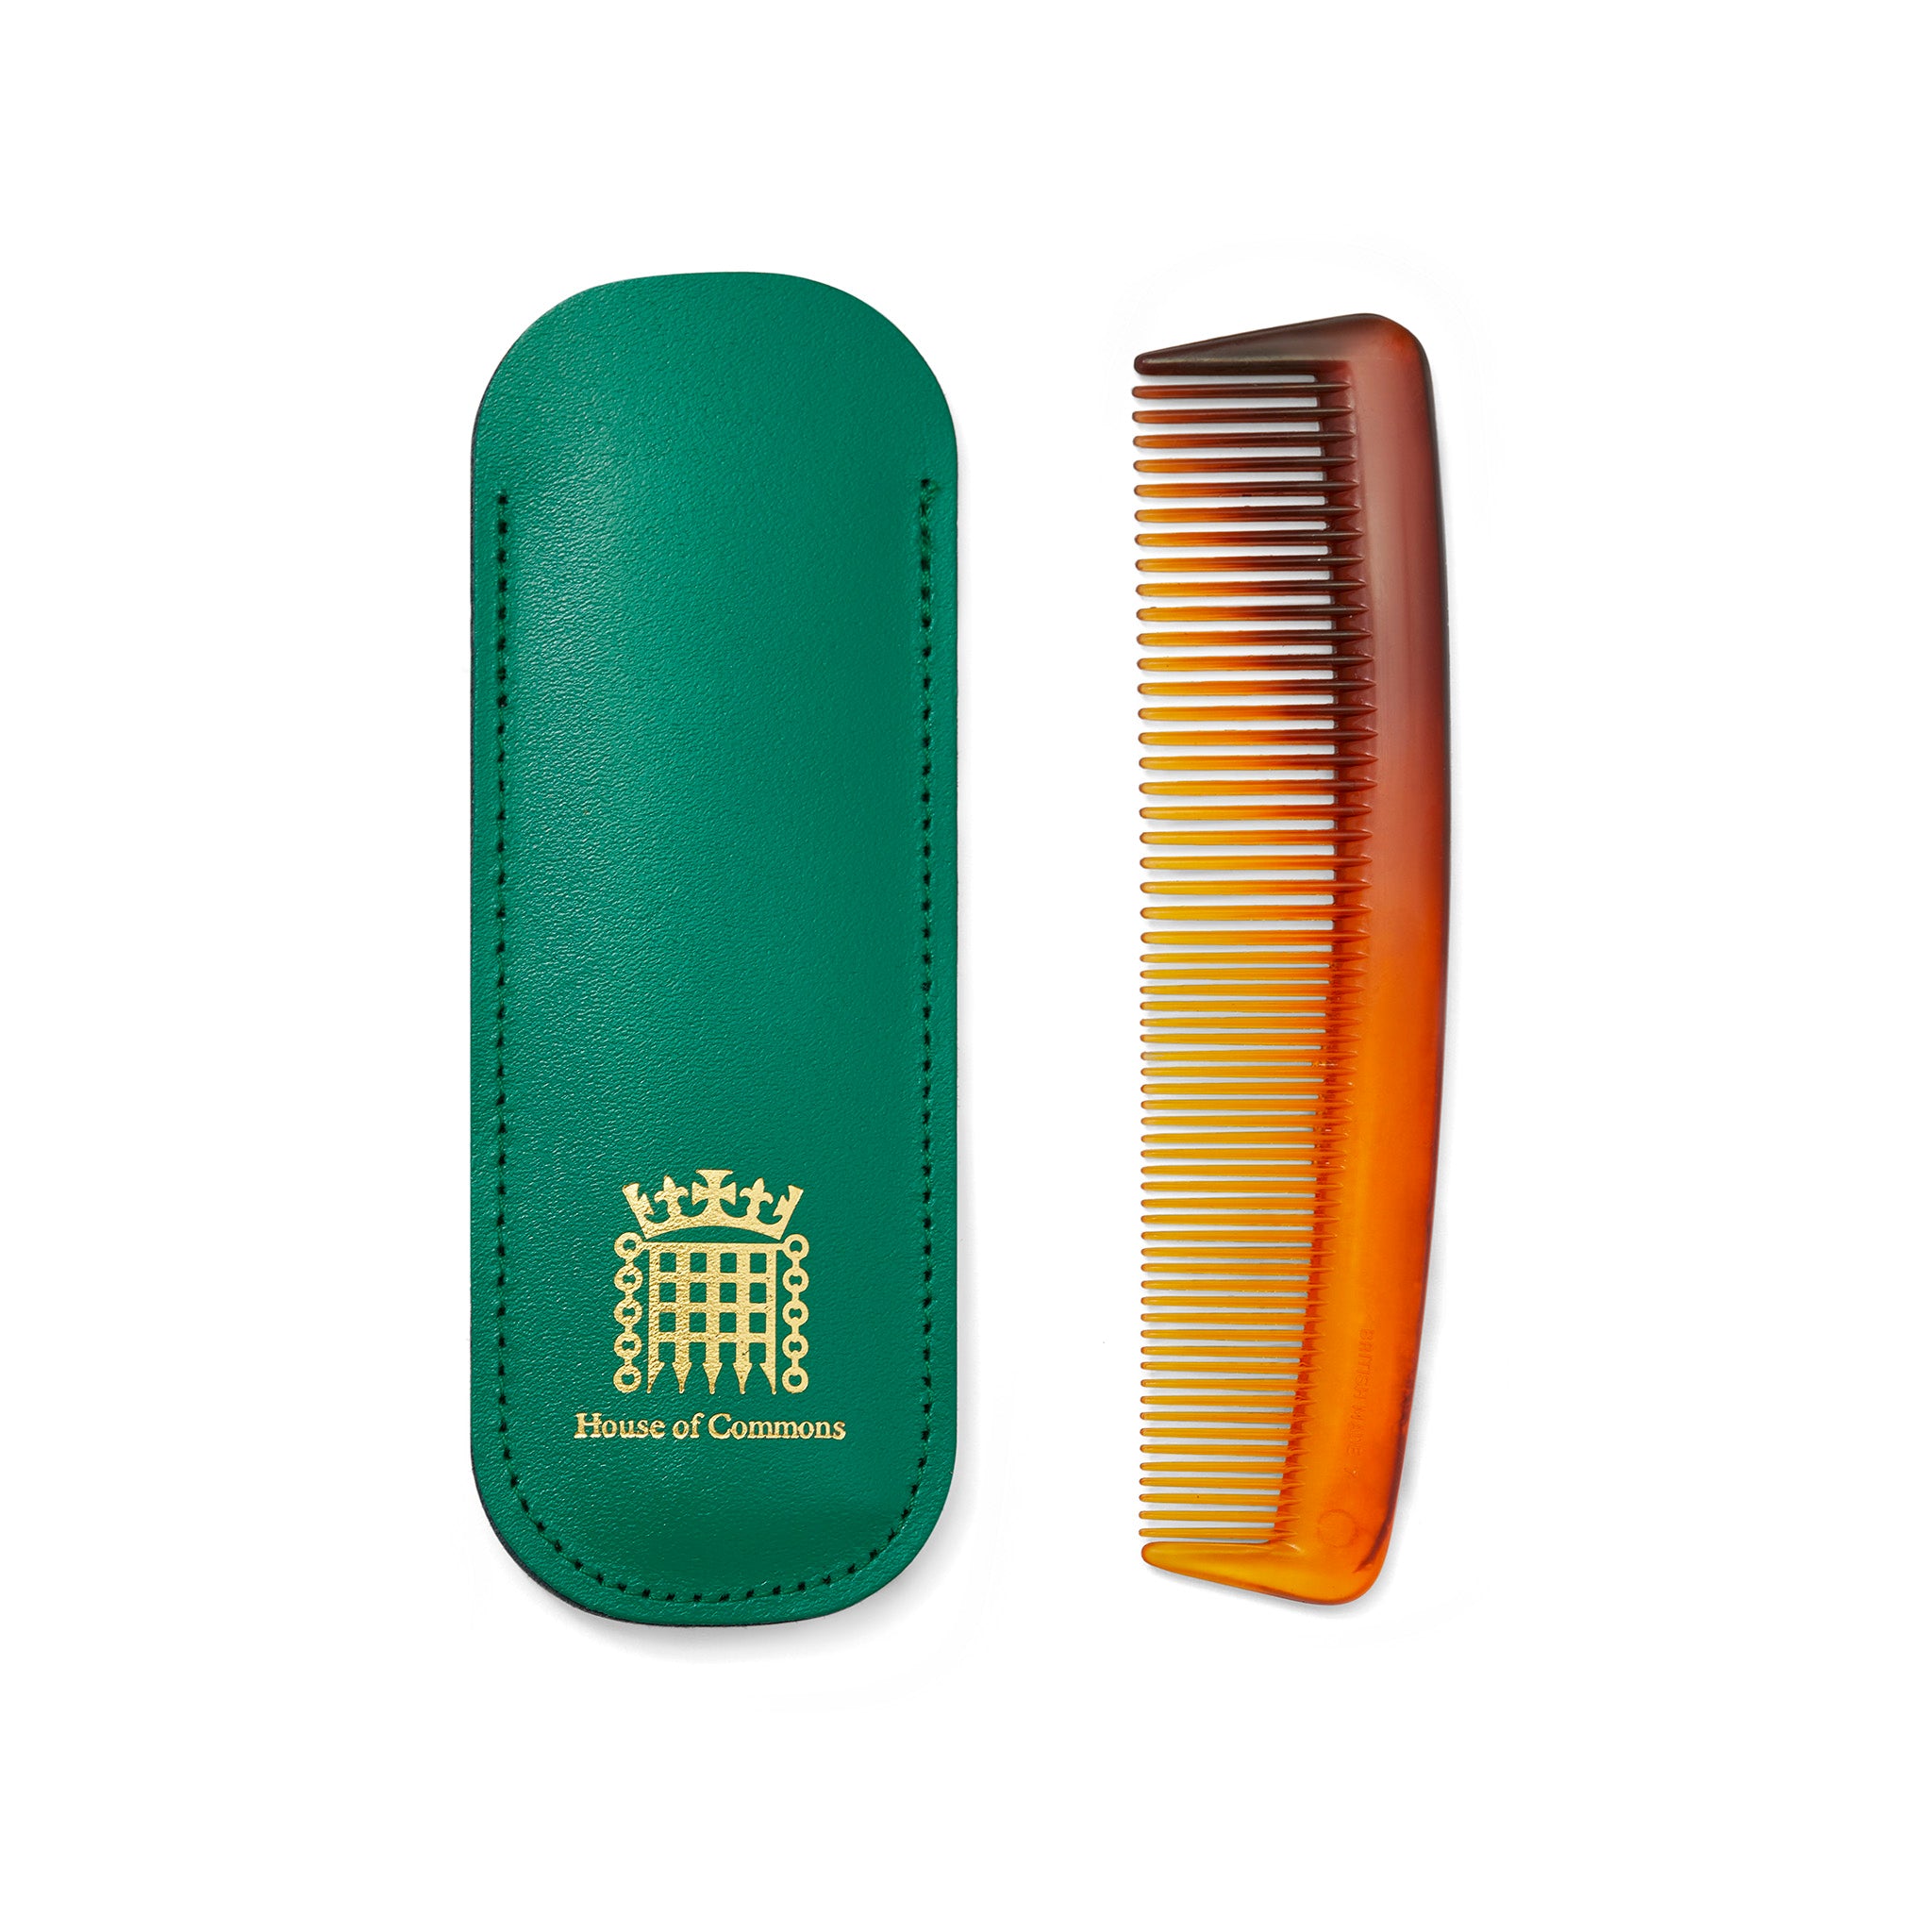 House of Commons Comb in Leather Case featured image